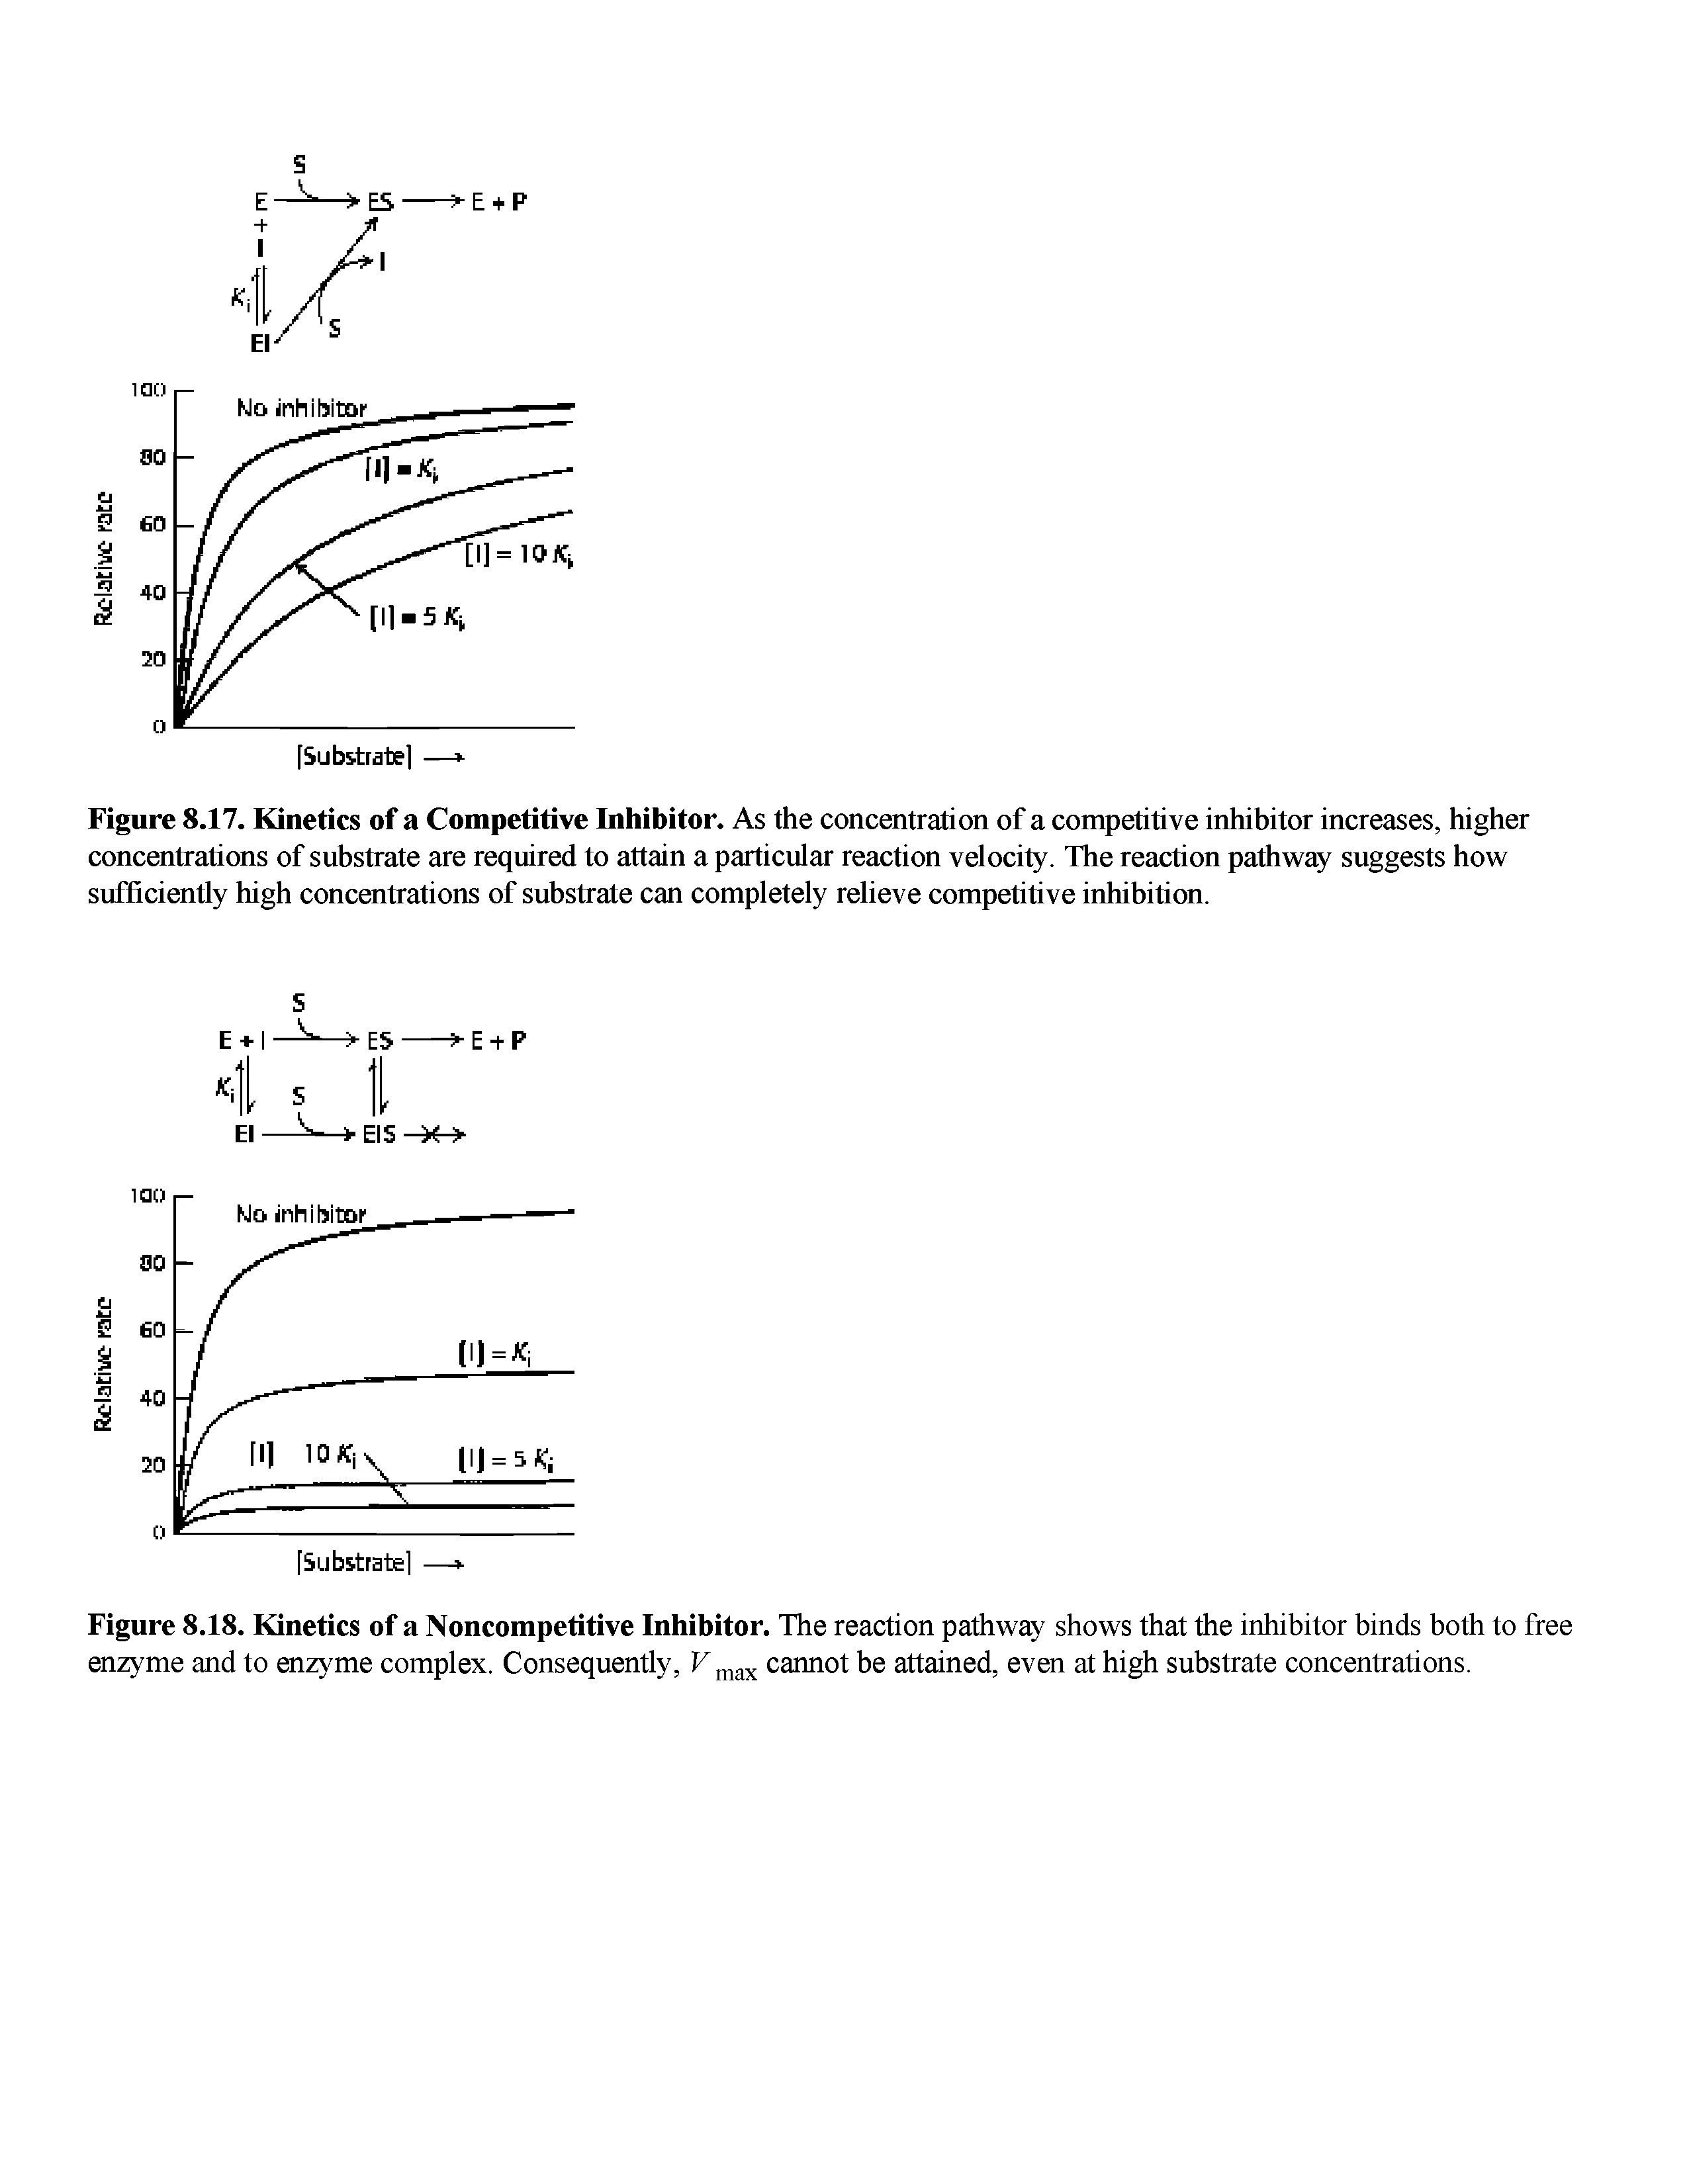 Figure 8.18. Kinetics of a Noncompetitive Inhibitor. The reaction pathway shows that the inhibitor binds both to free enzyme and to enzyme complex. Consequently, cannot be attained, even at high substrate concentrations.